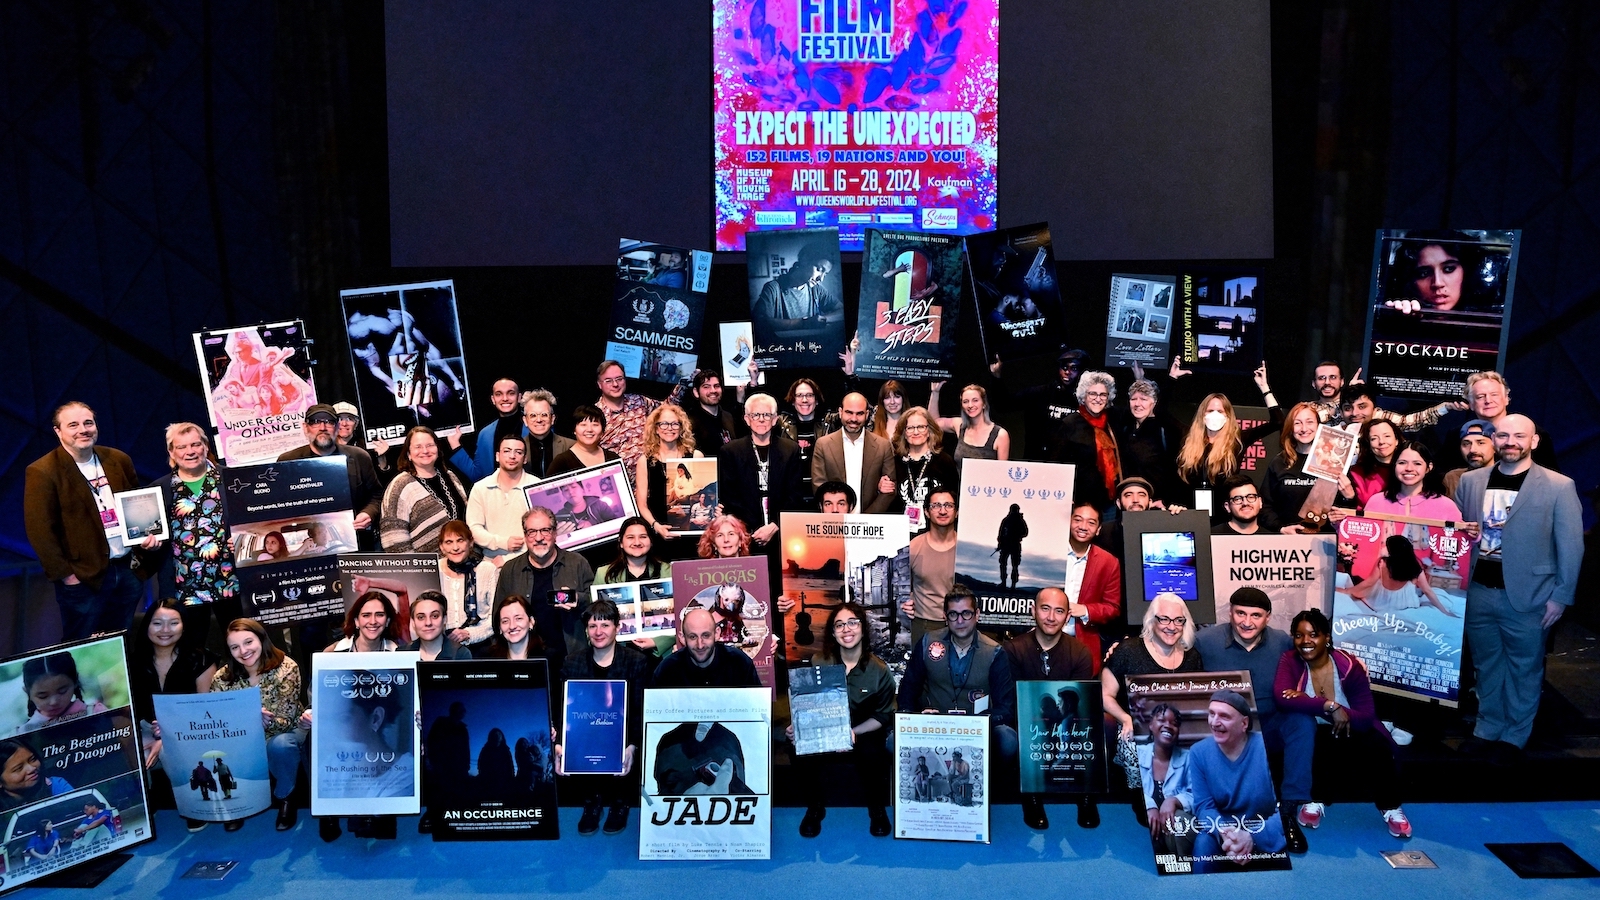 A large group of people in a movie theater posing for the camera while holding up a variety of movie posters